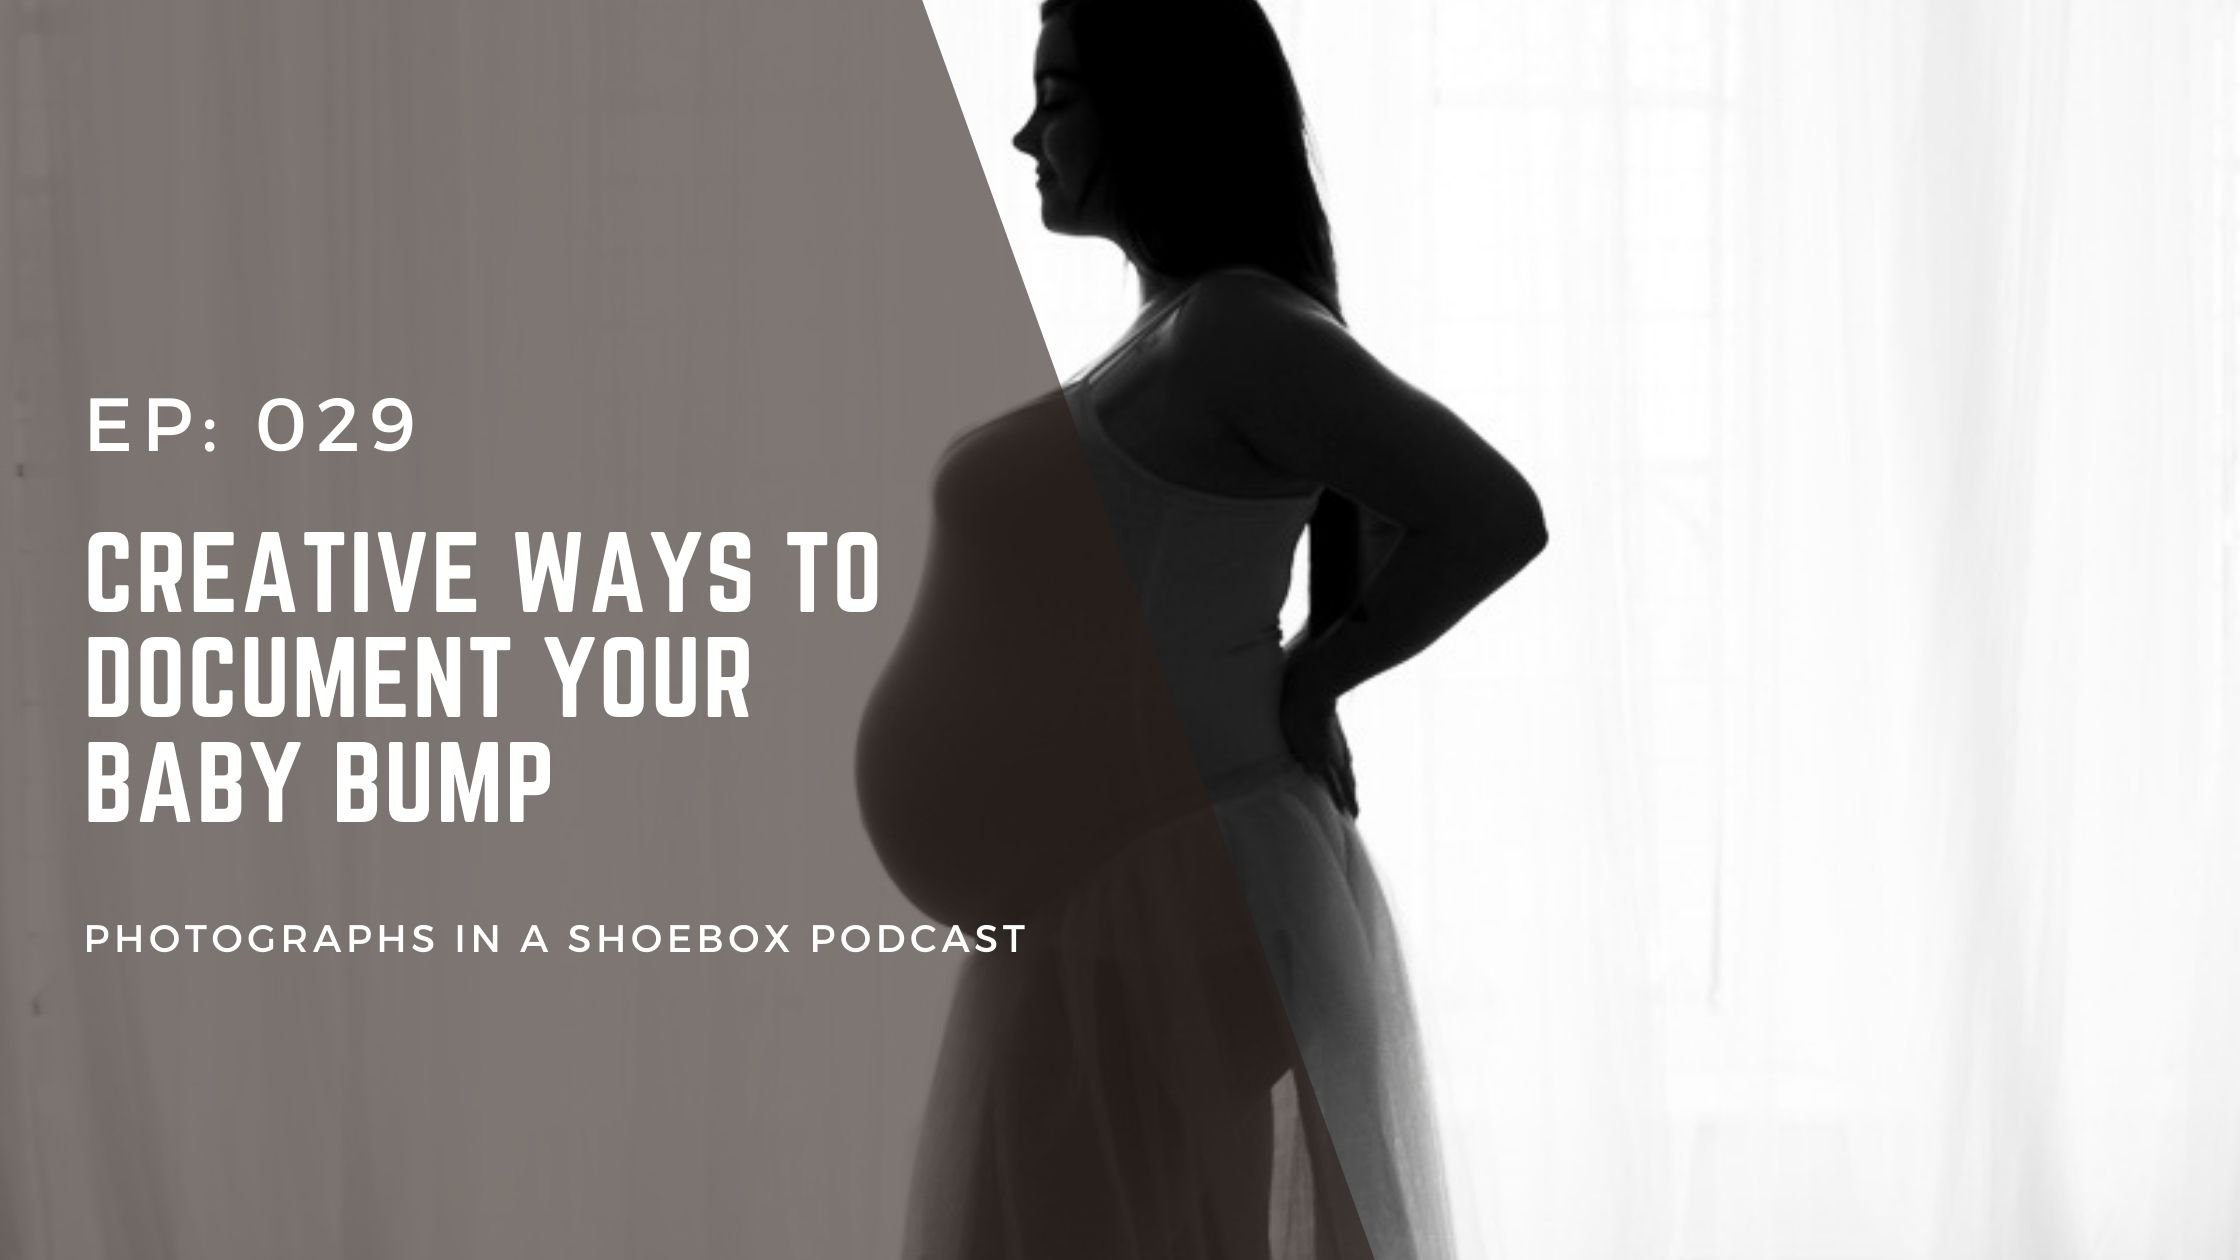 podcast episode 29 title cover: creative ways to document your baby bump